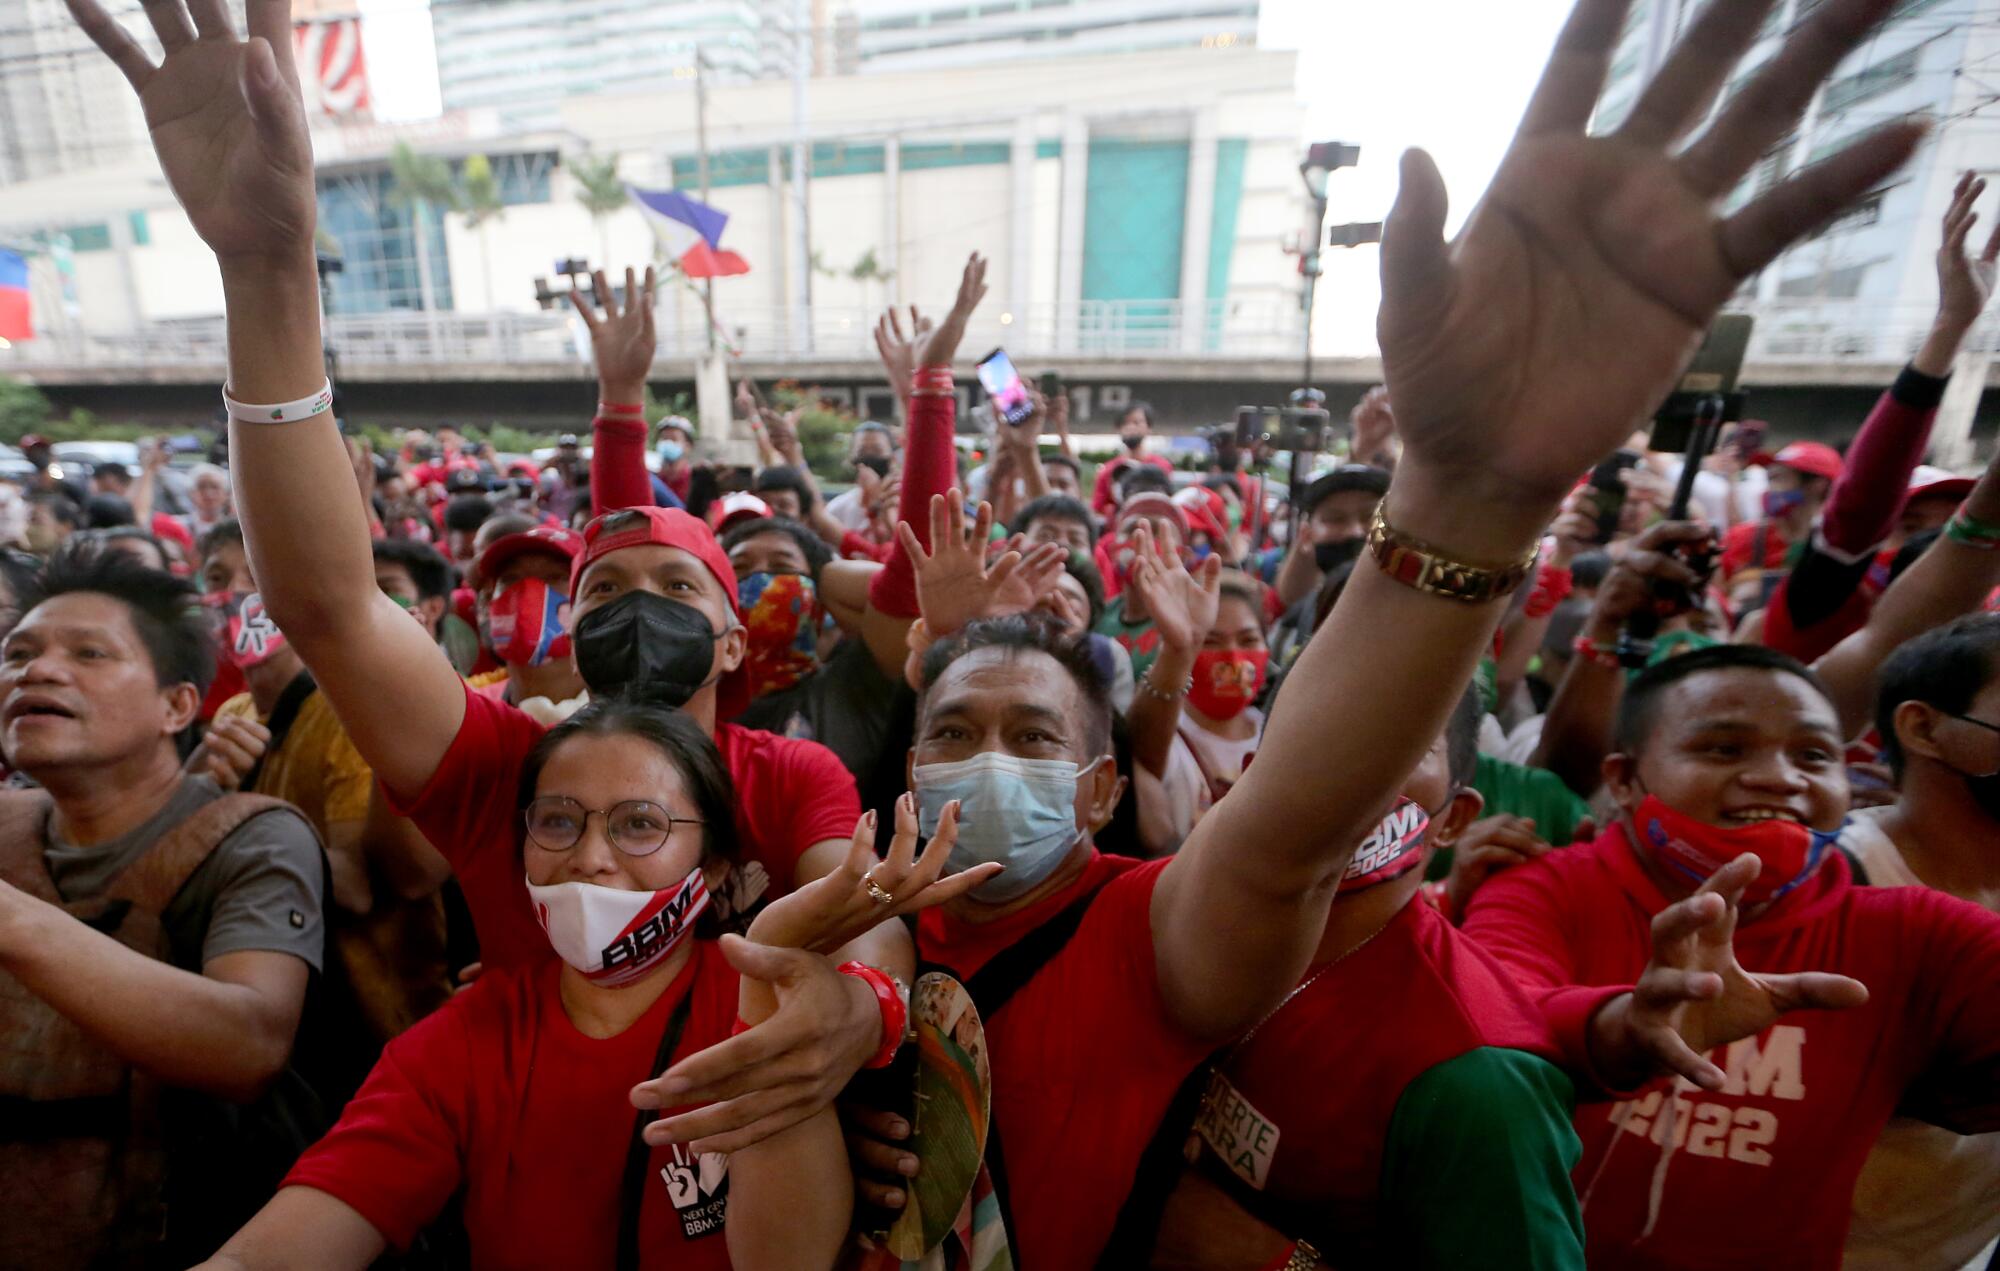 Supporters of presidential candidate Bong Bong Marcos celebrate with hands raised.